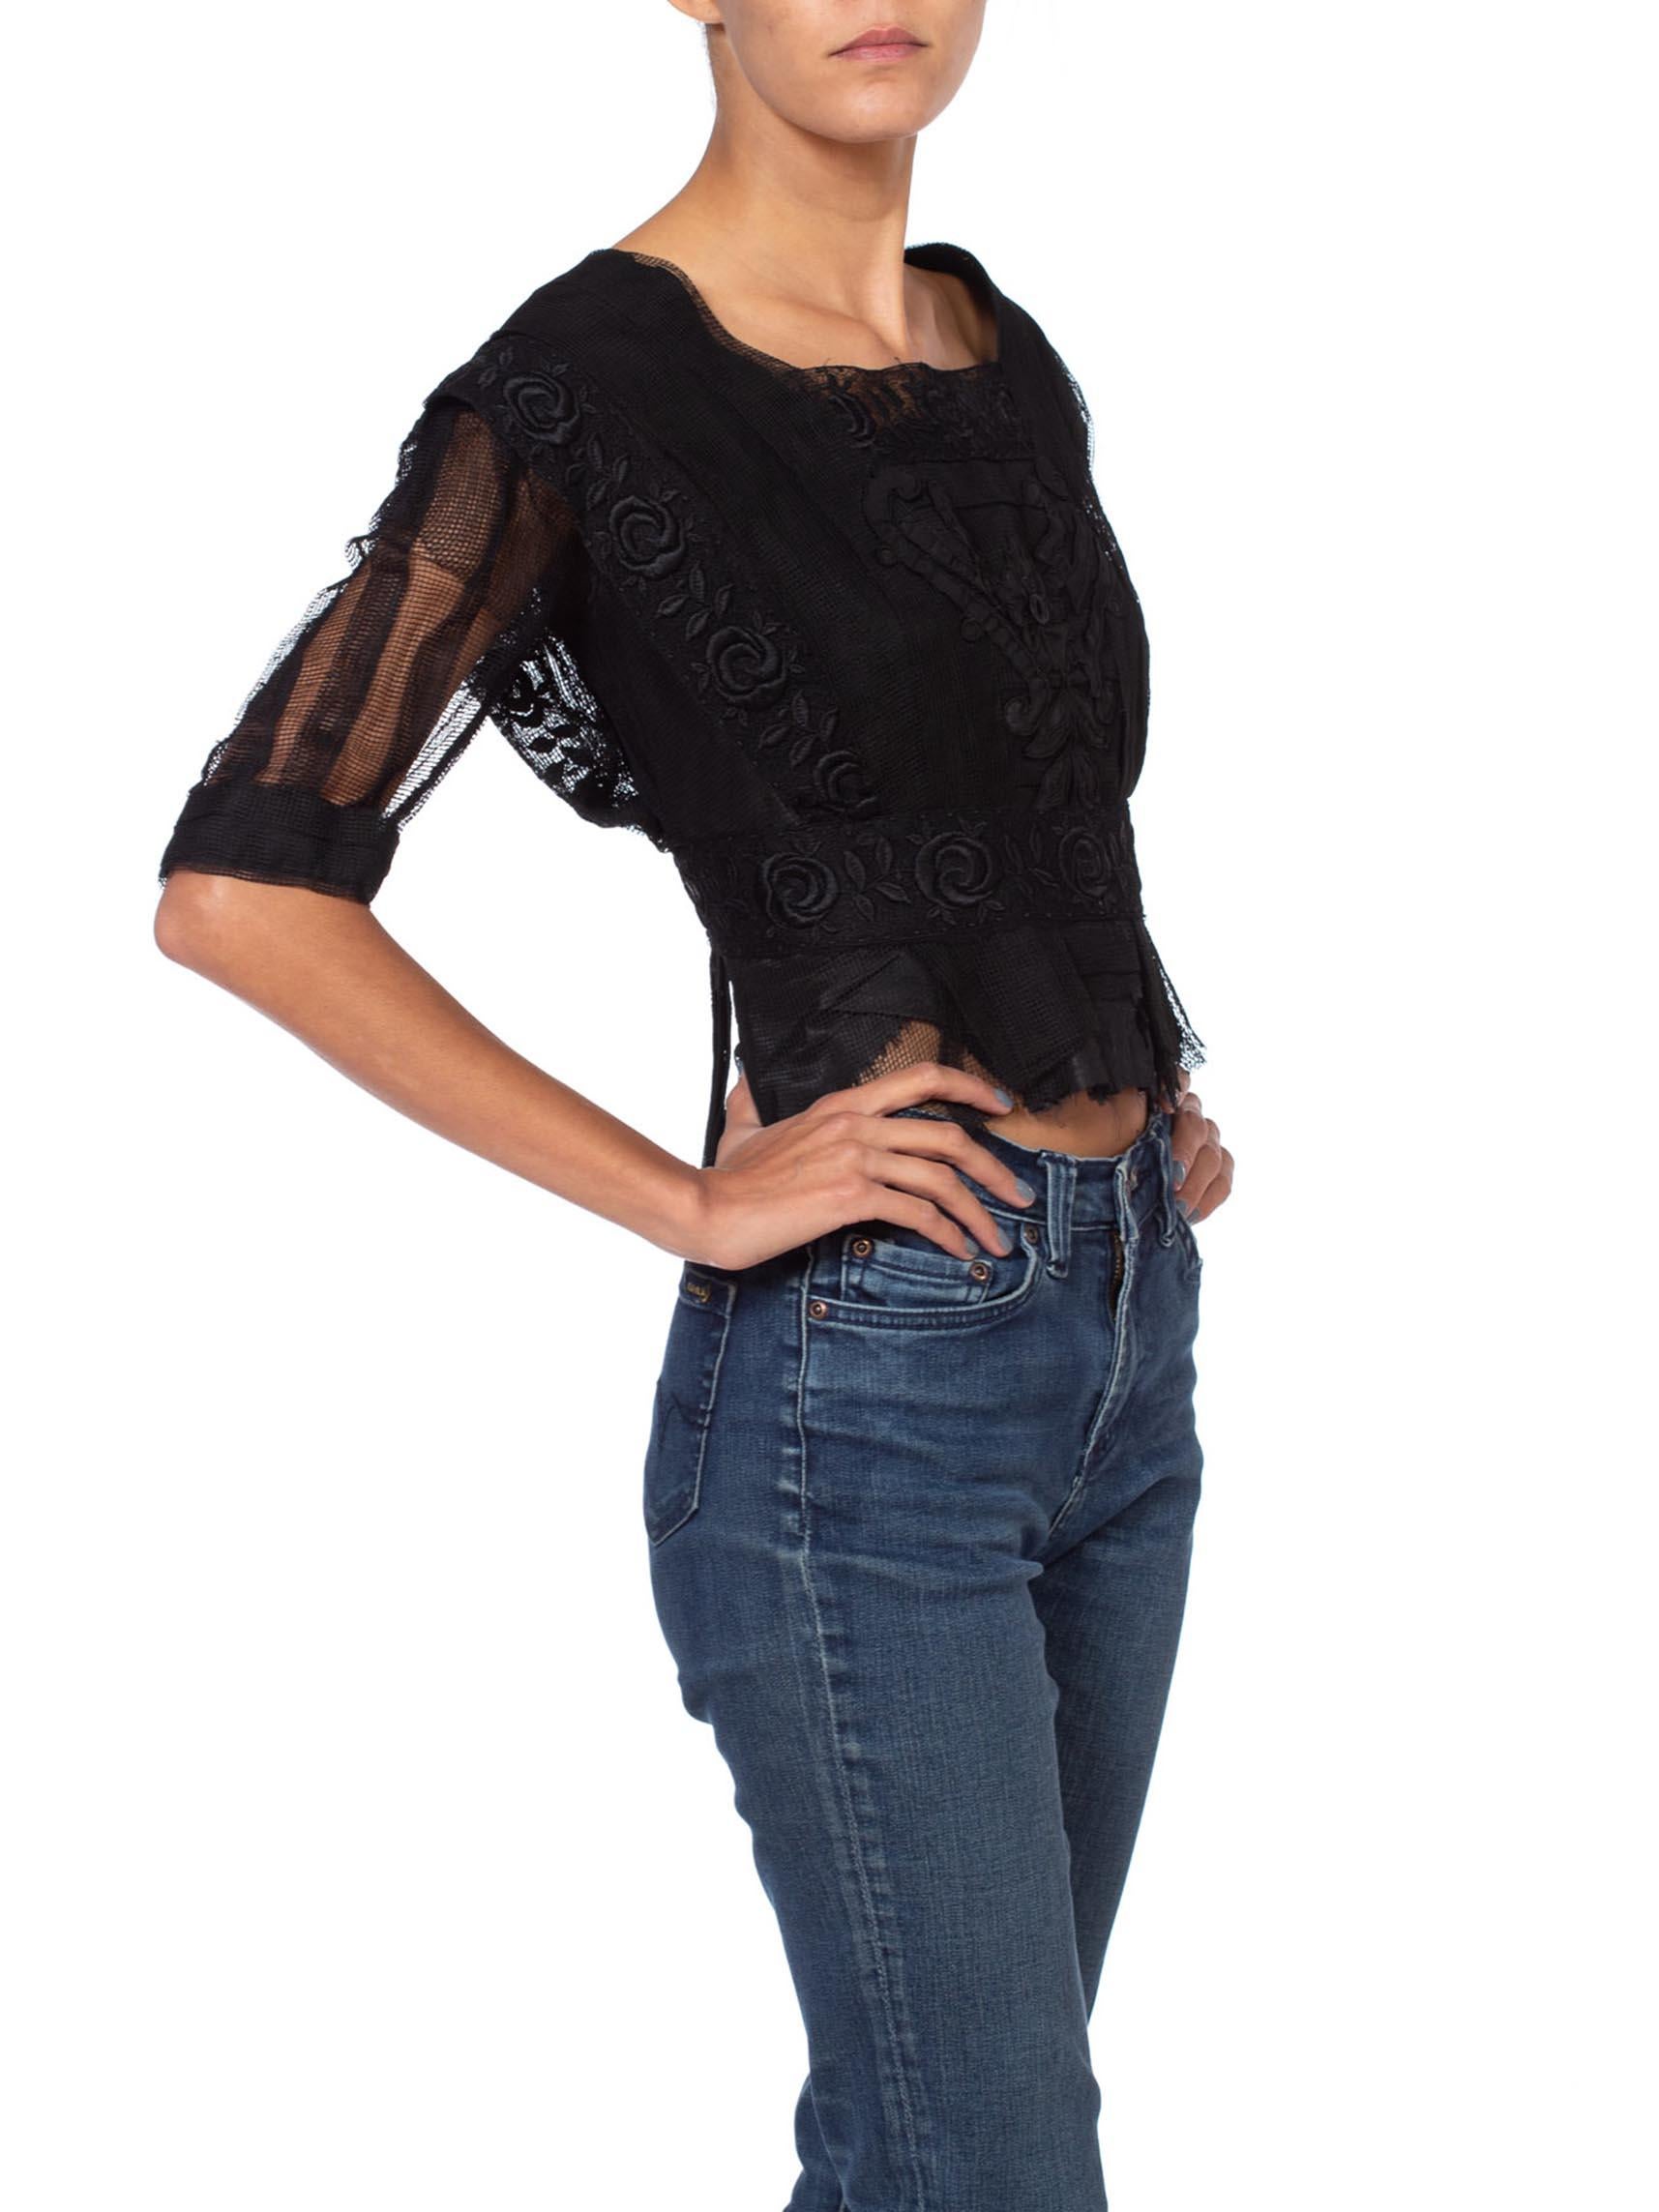 Edwardian Black Silk Net & Lace Blouse With Floral Embroidery 1